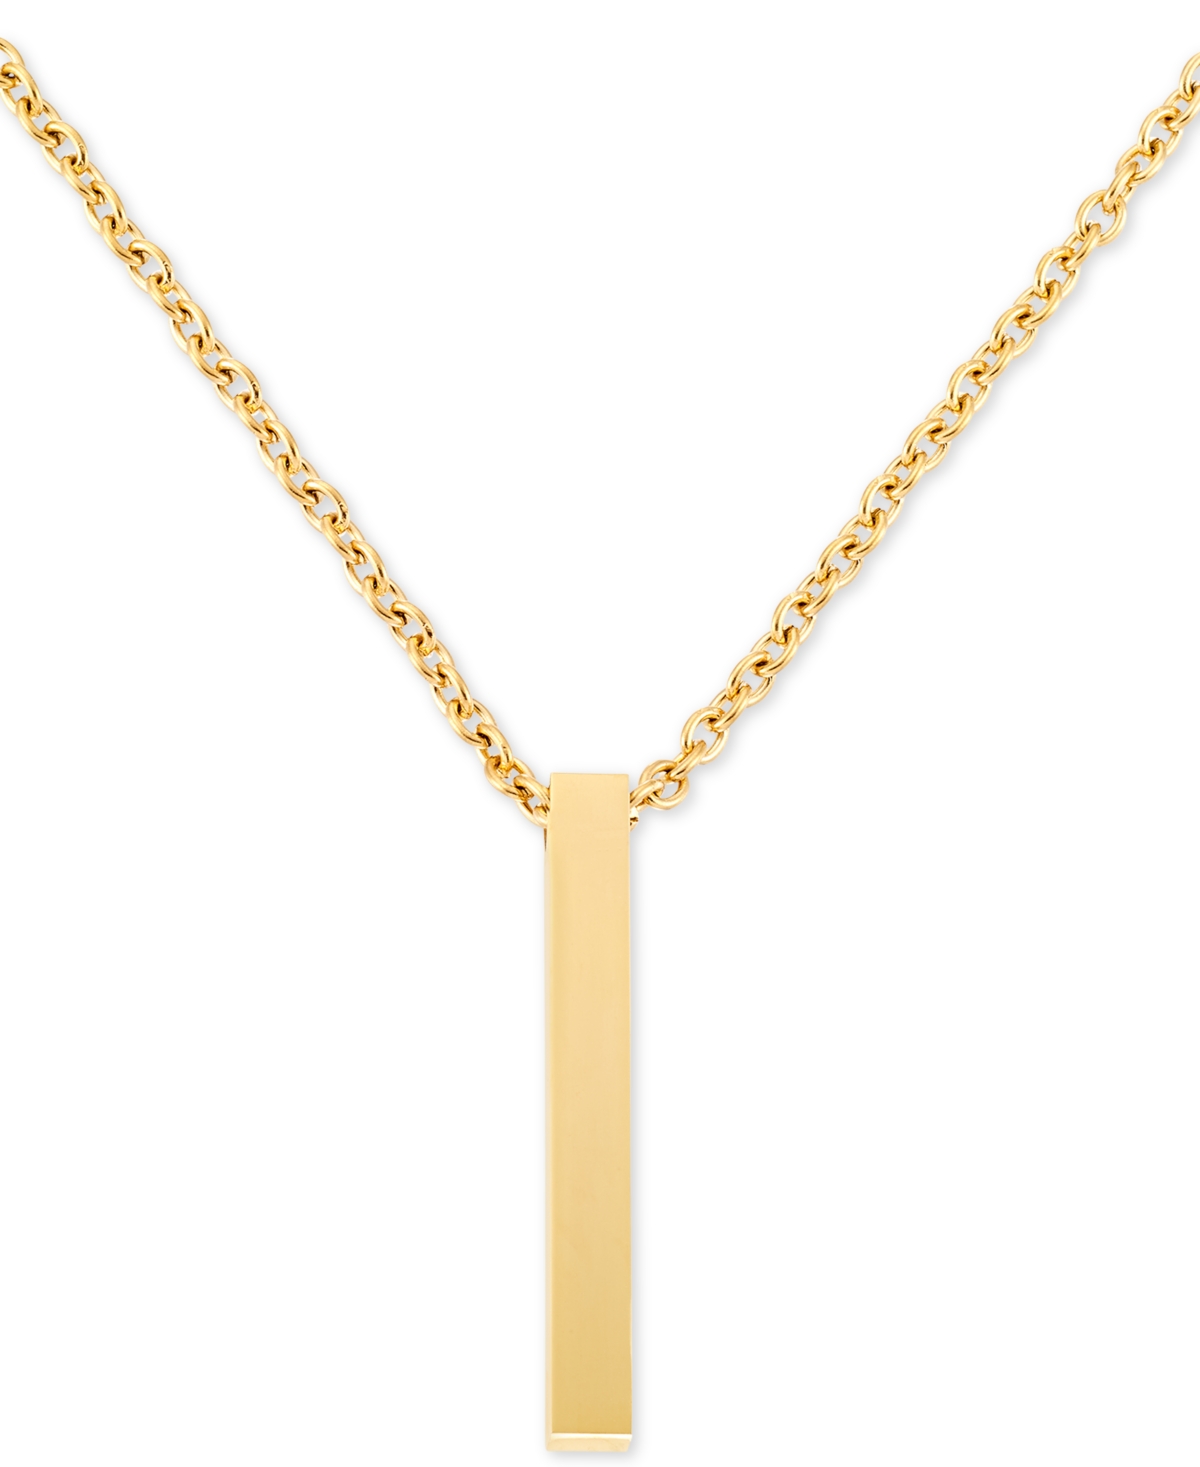 Smith Men's Polished Bar 24" Pendant Necklace in Yellow Ion-Plated Stainless Steel - Gold Tone